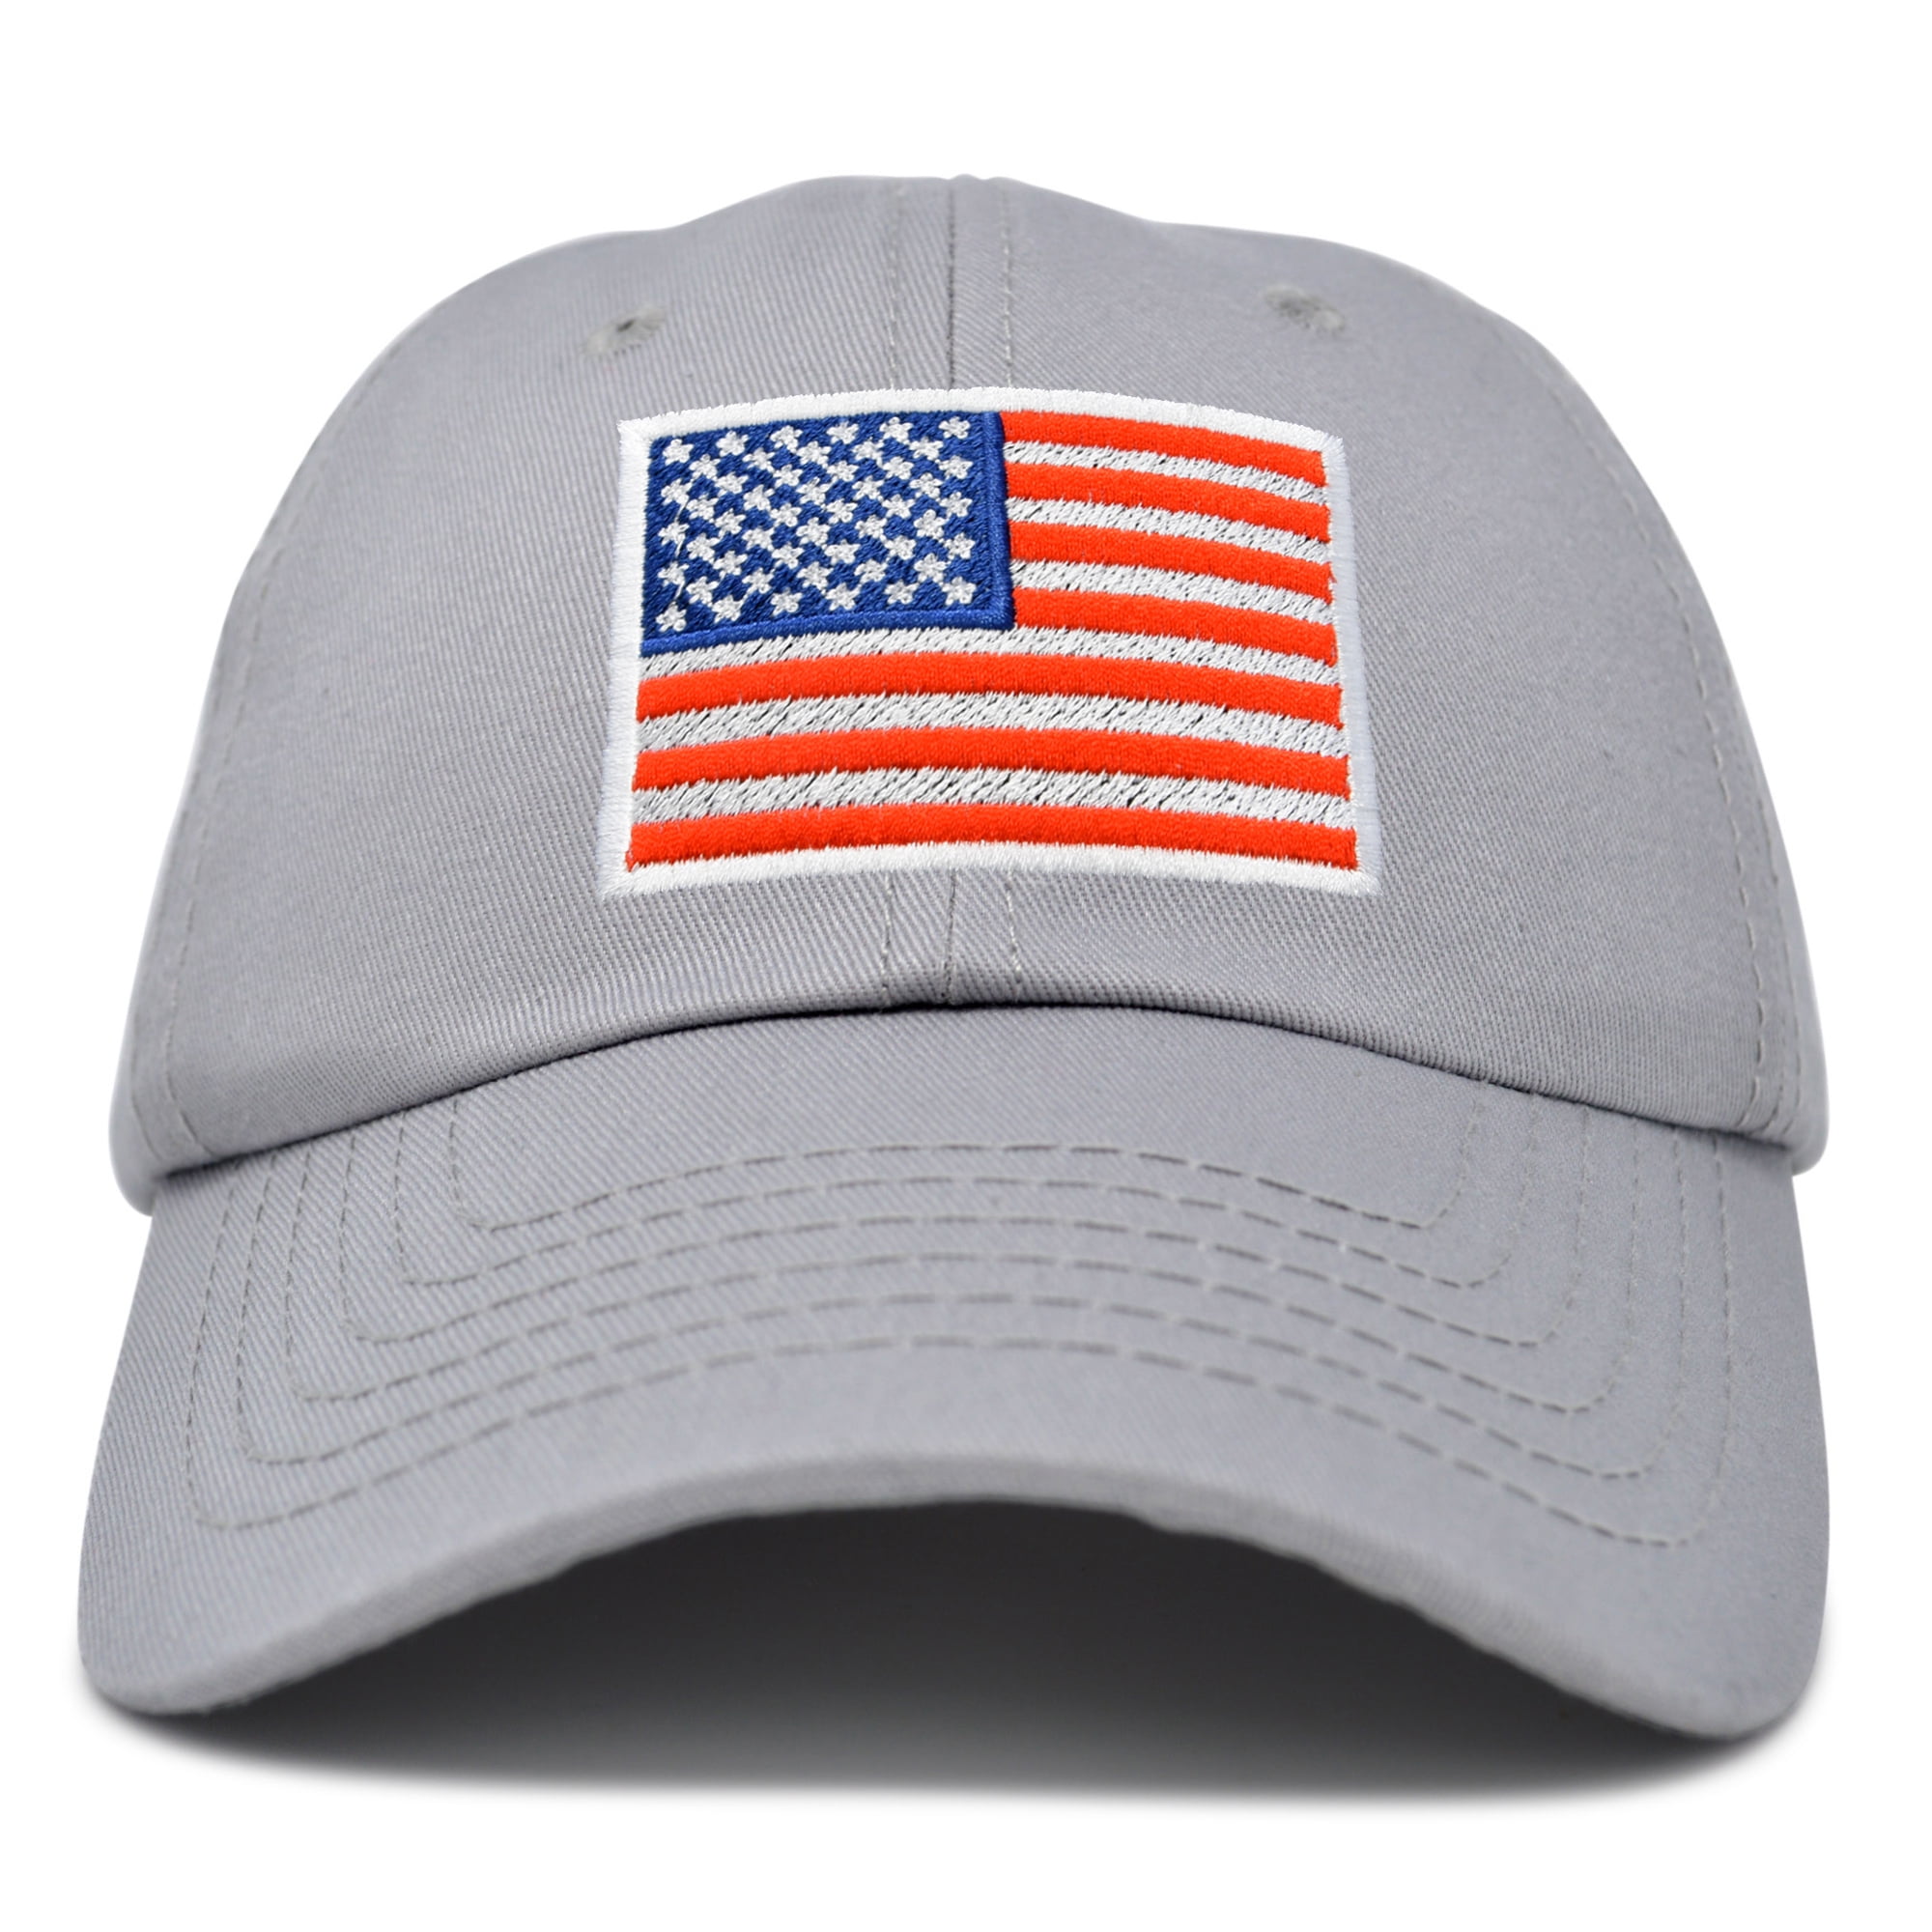 Hat With American Flag - Photos